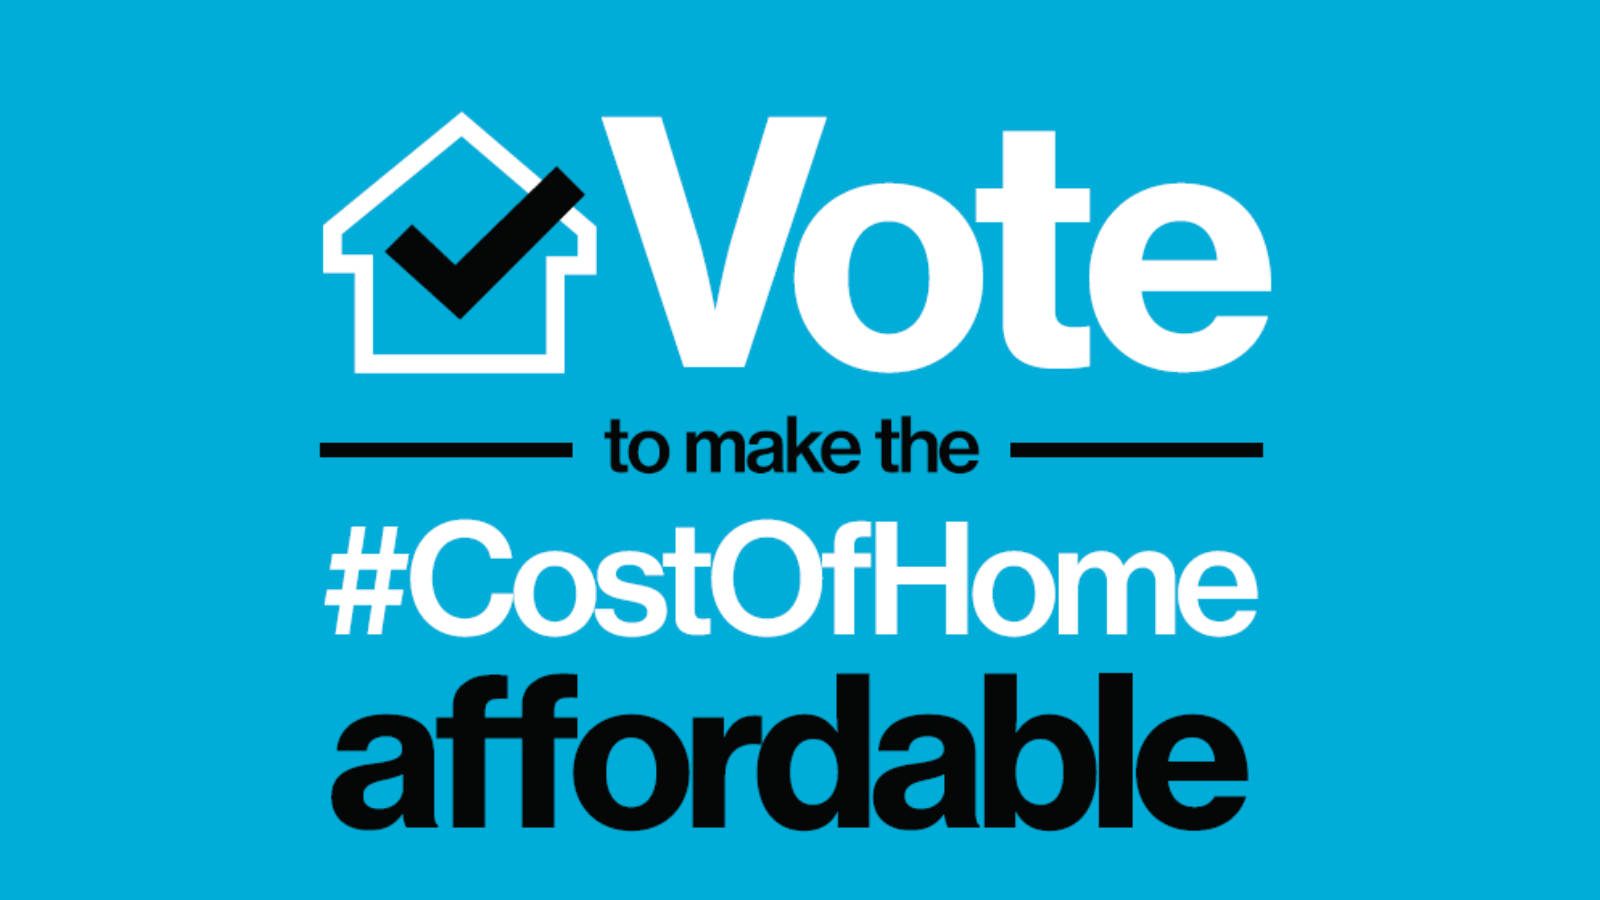 Vote to make the #CostOfHome affordable